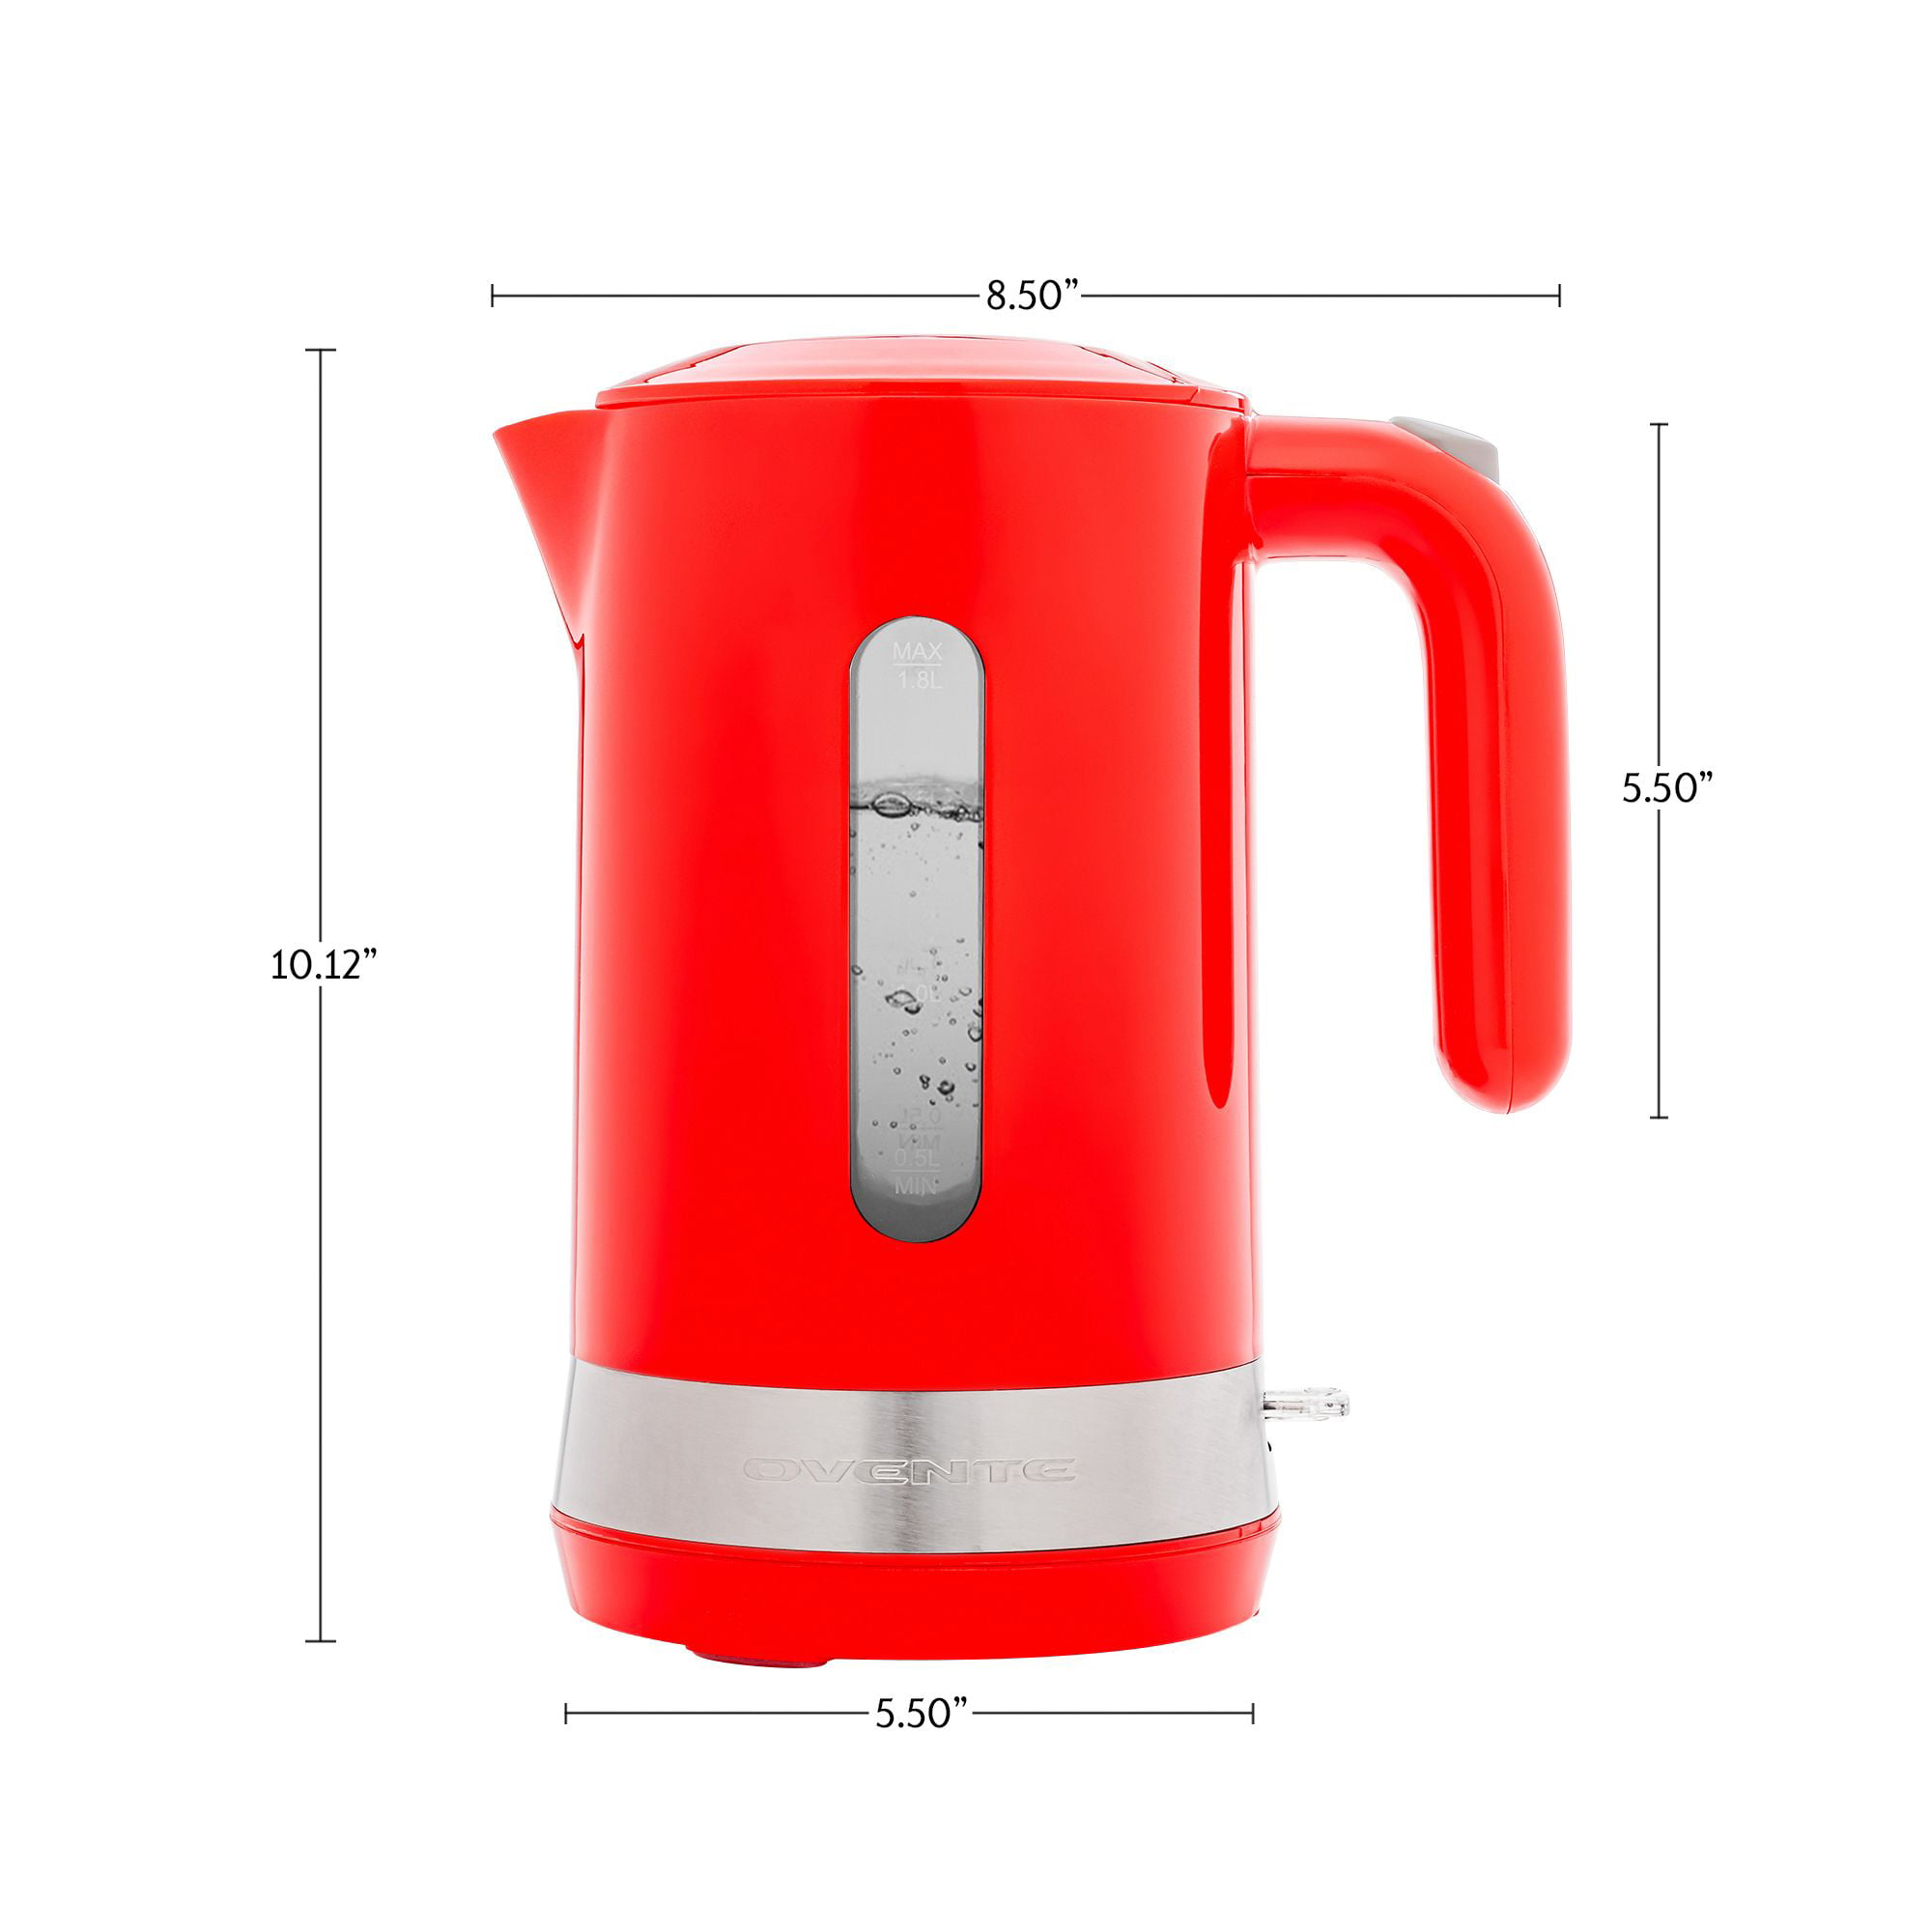 OVENTE Illuminated 6.5-Cup Red Electric Kettle with Filter, Fast Heating  and Auto-Shut Off KG83R - The Home Depot